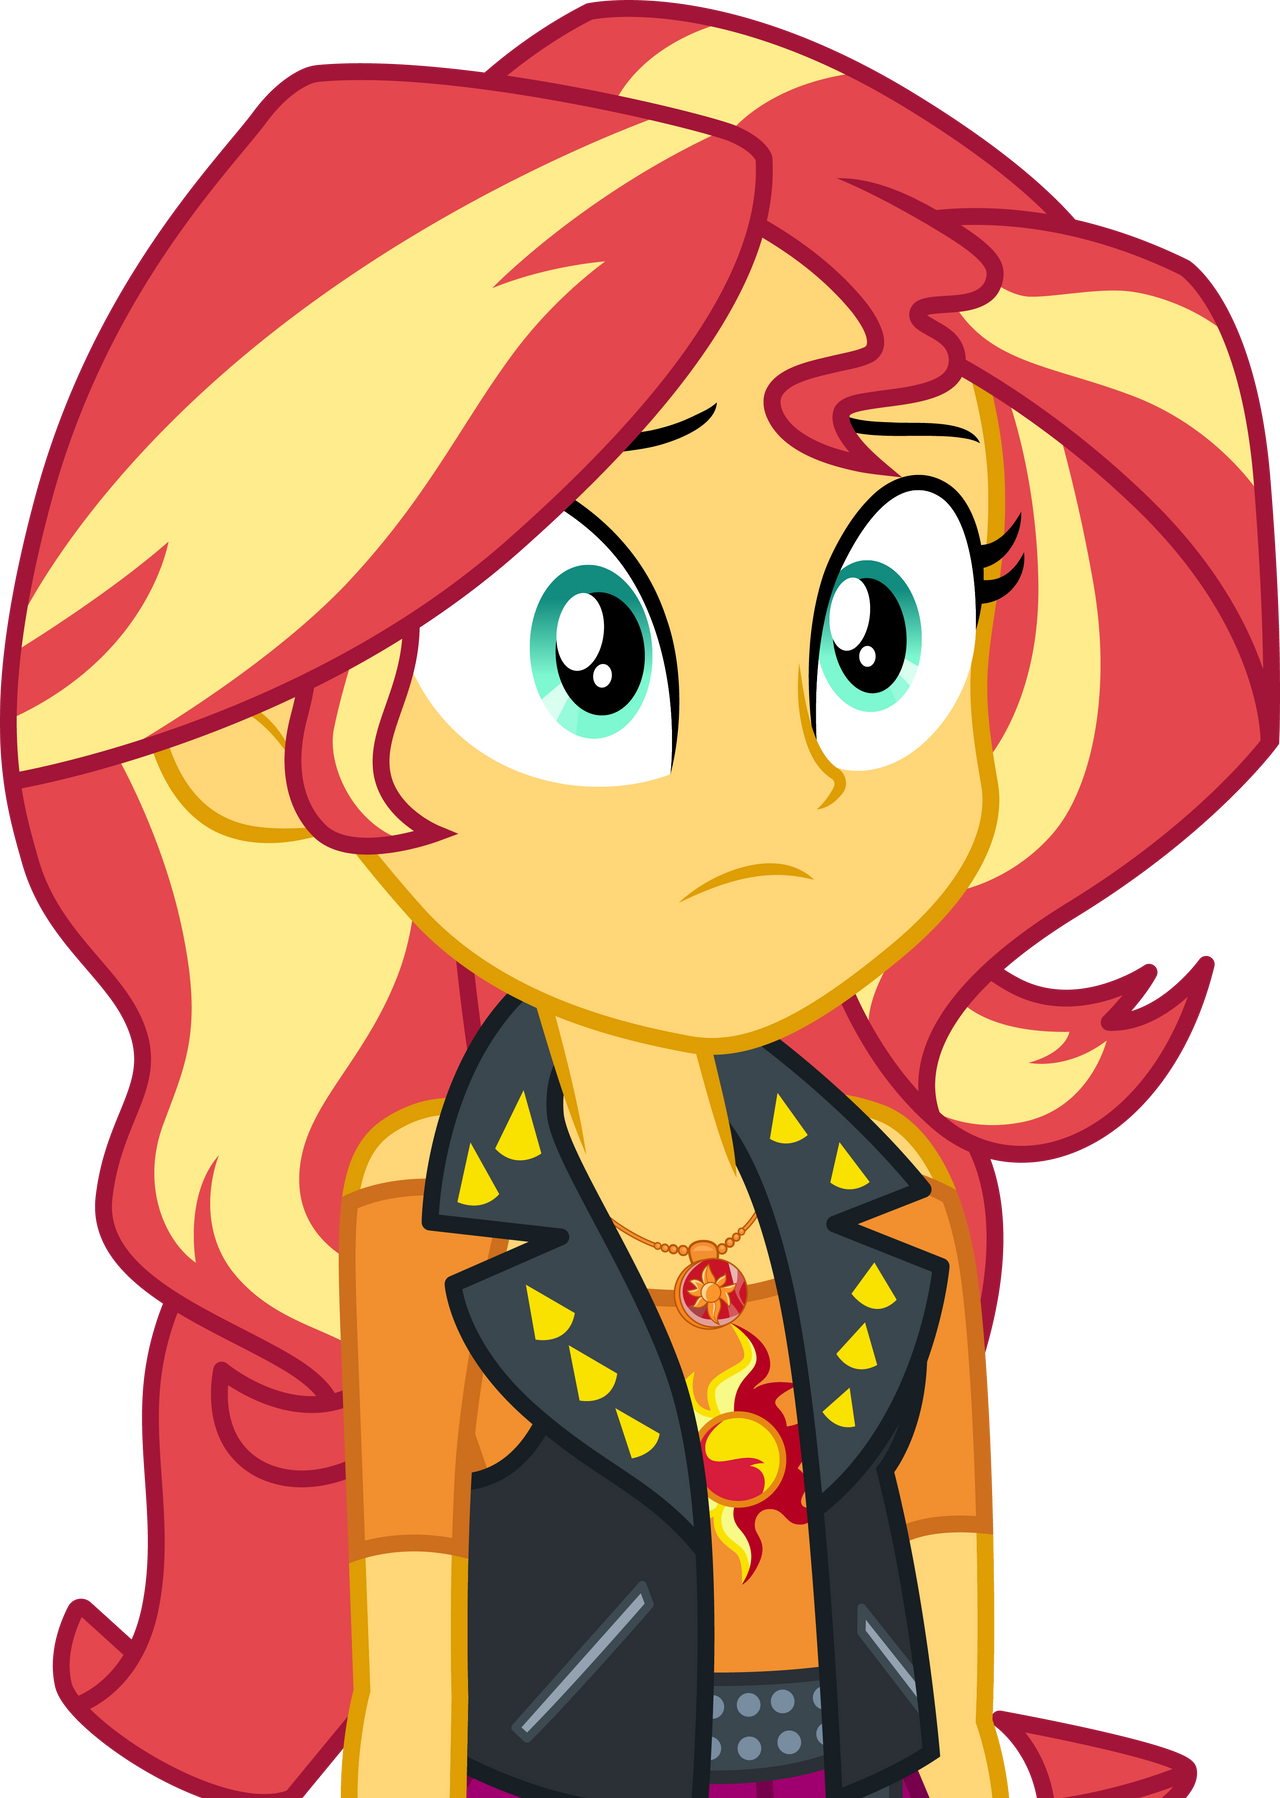 Sunset Shimmer looking at Wallflower by CloudyGlow on DeviantArt